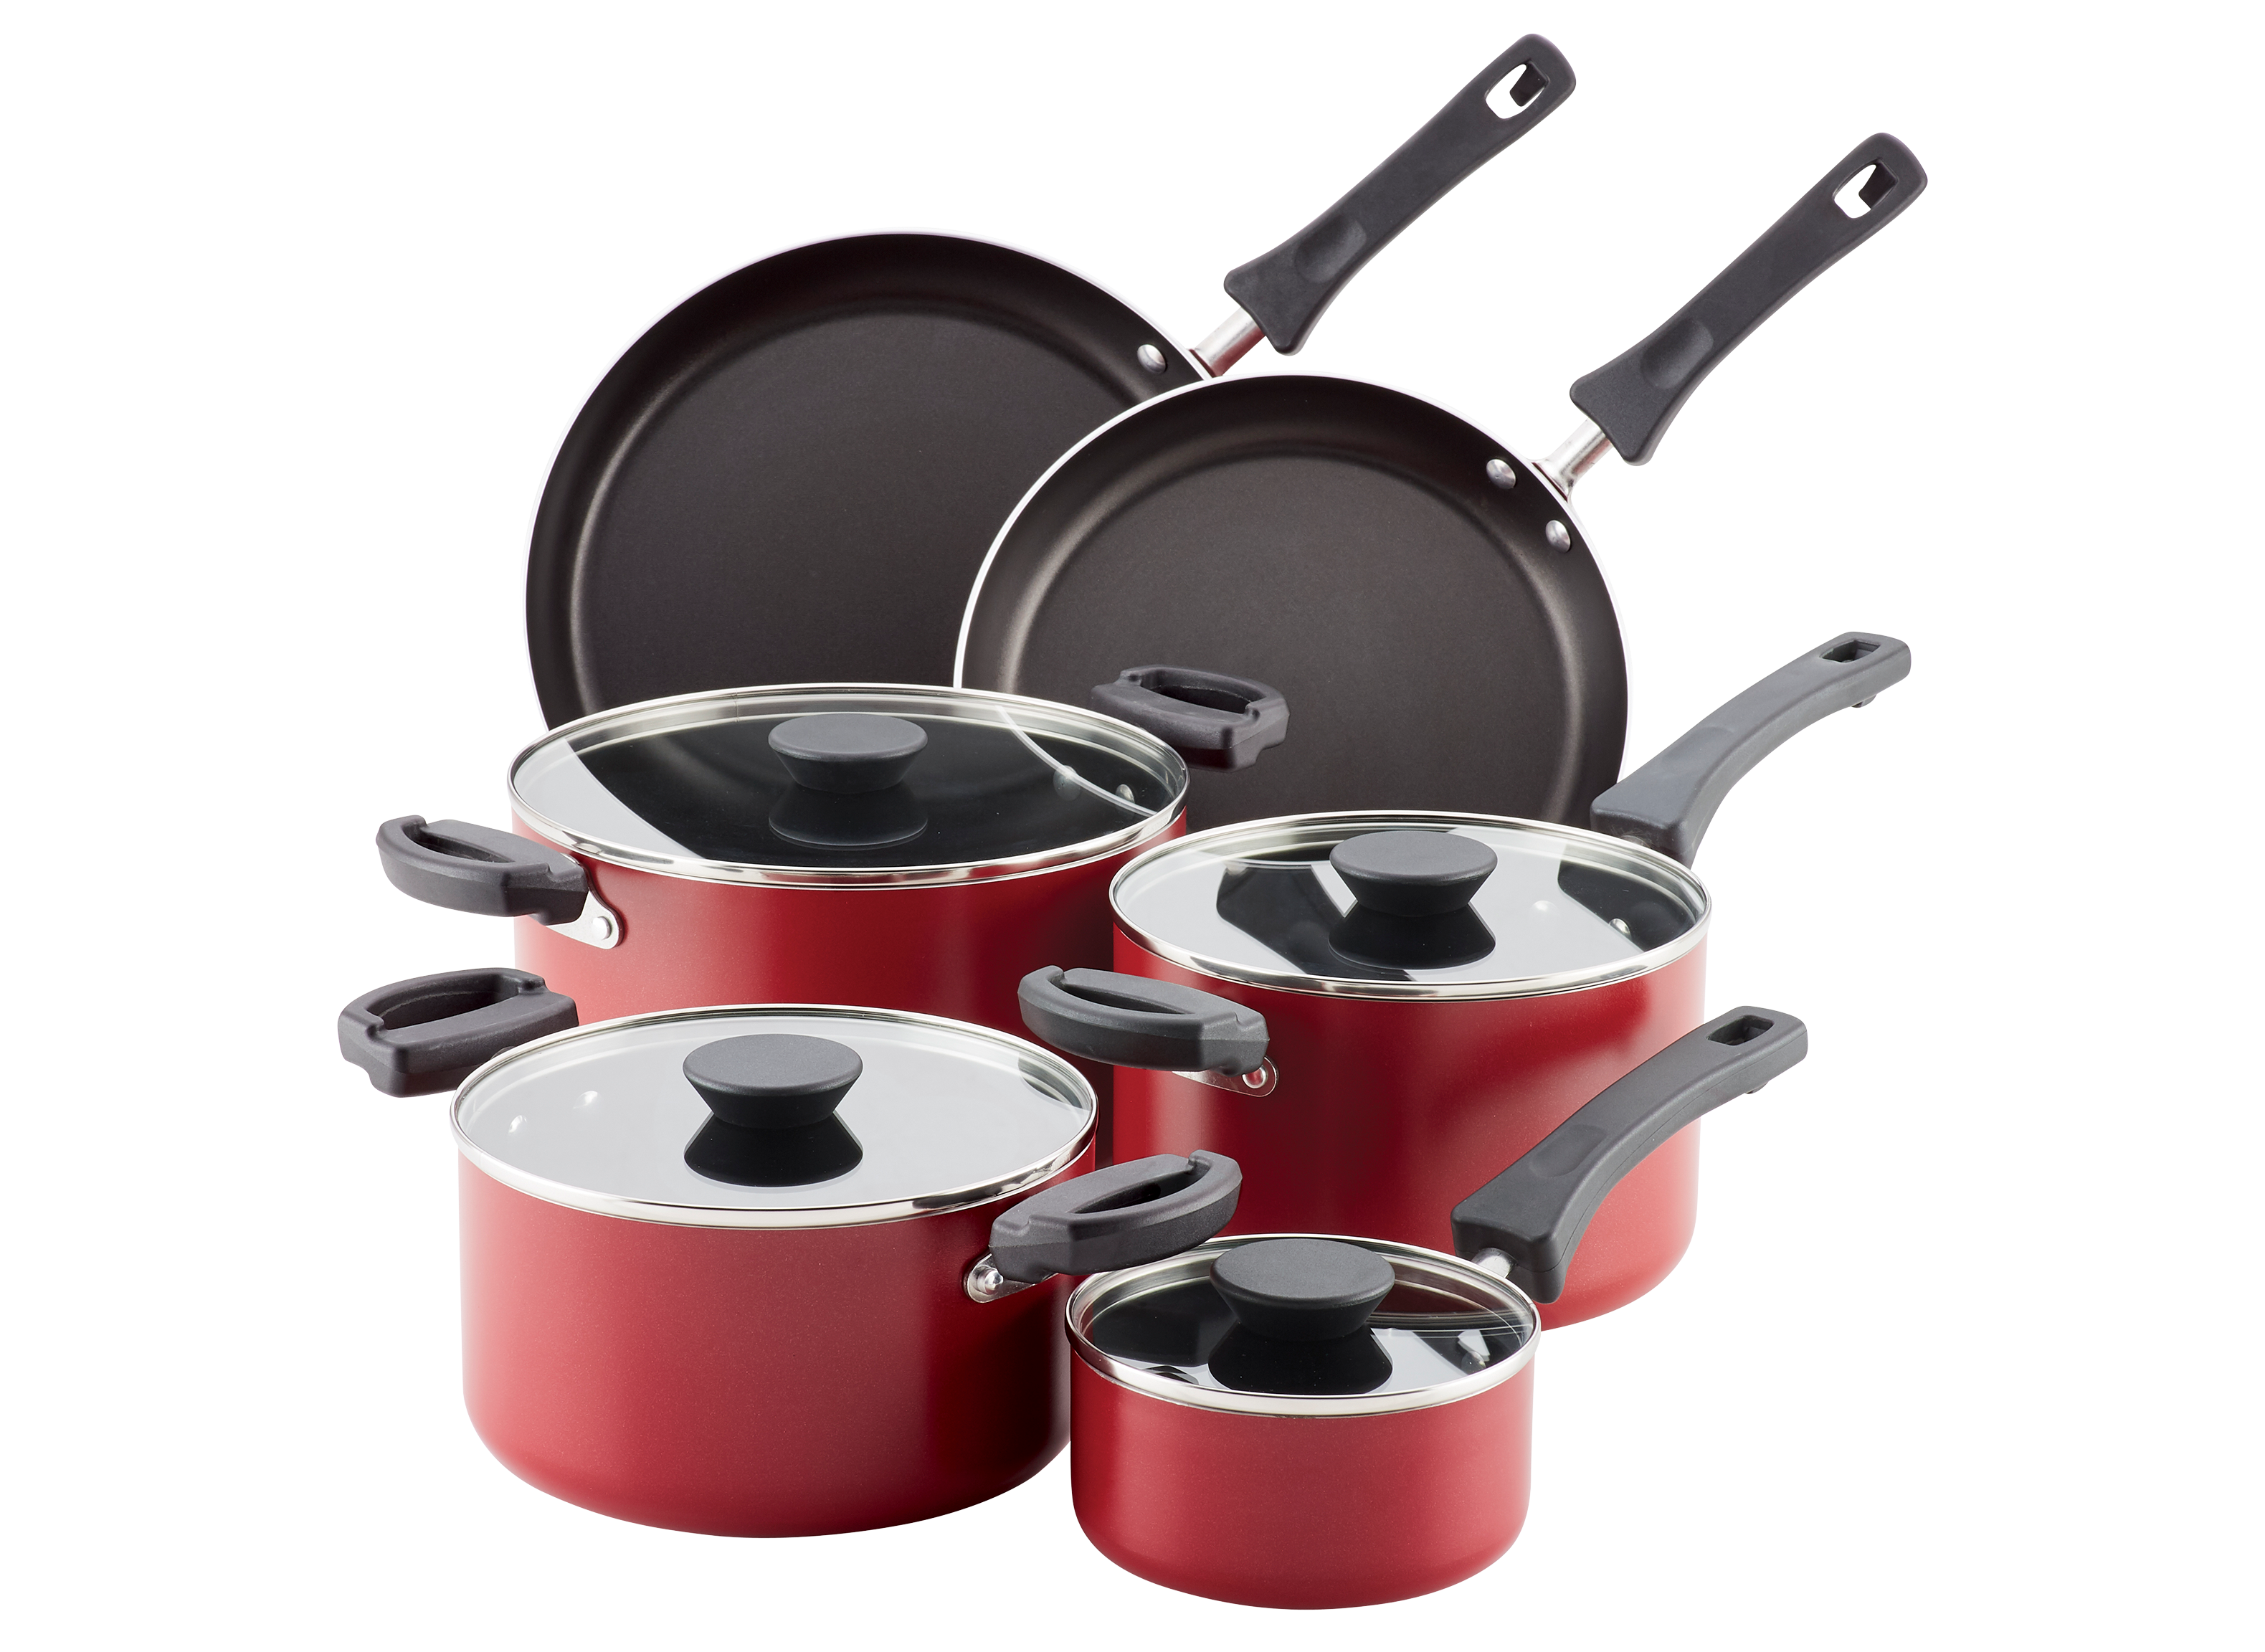 https://crdms.images.consumerreports.org/prod/products/cr/models/399704-cookware-sets-nonstick-farberware-nesting-10008342.png